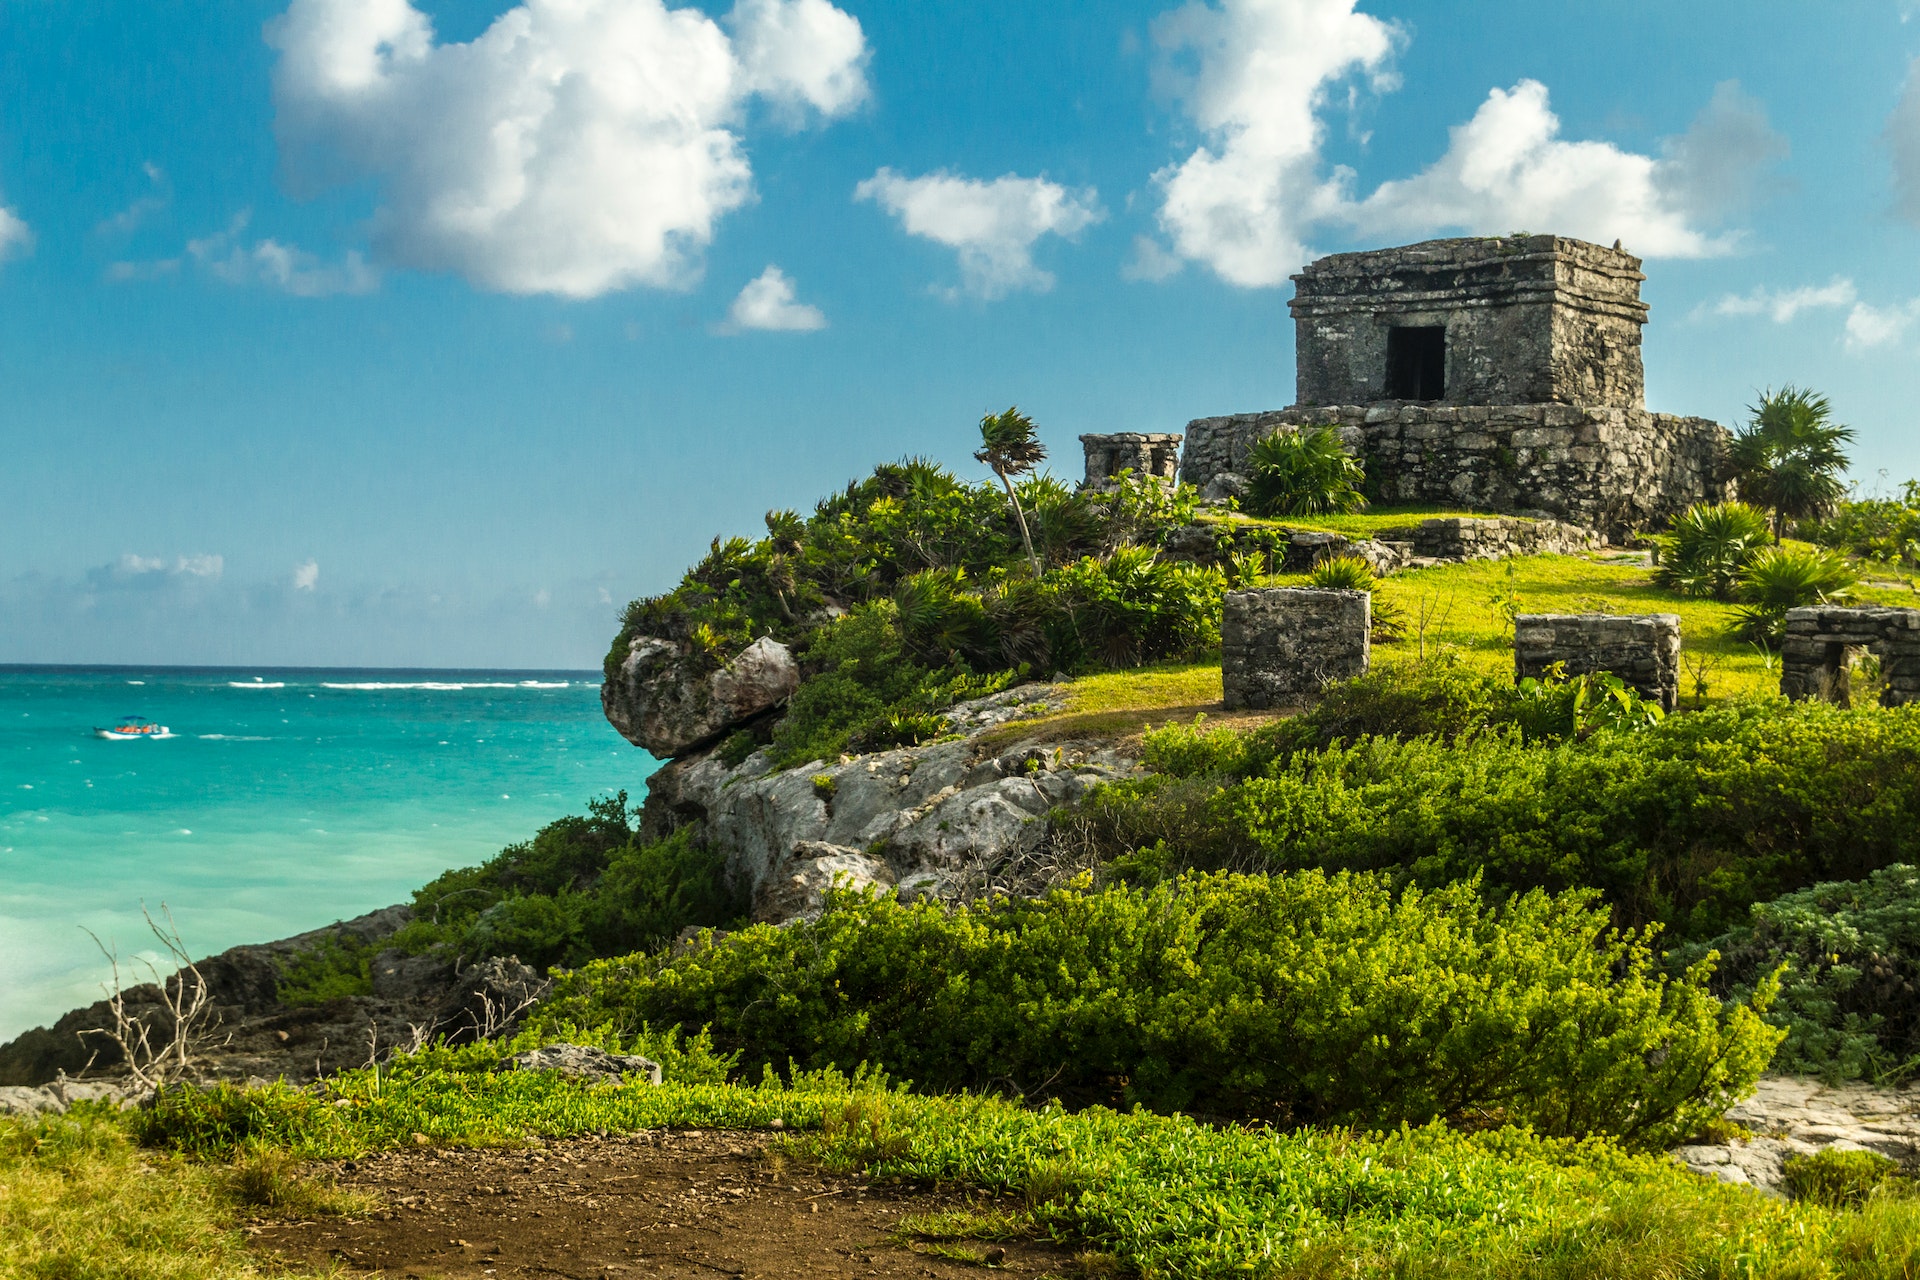 A picturesque beach and Mayan ruins in Tulum, Mexico